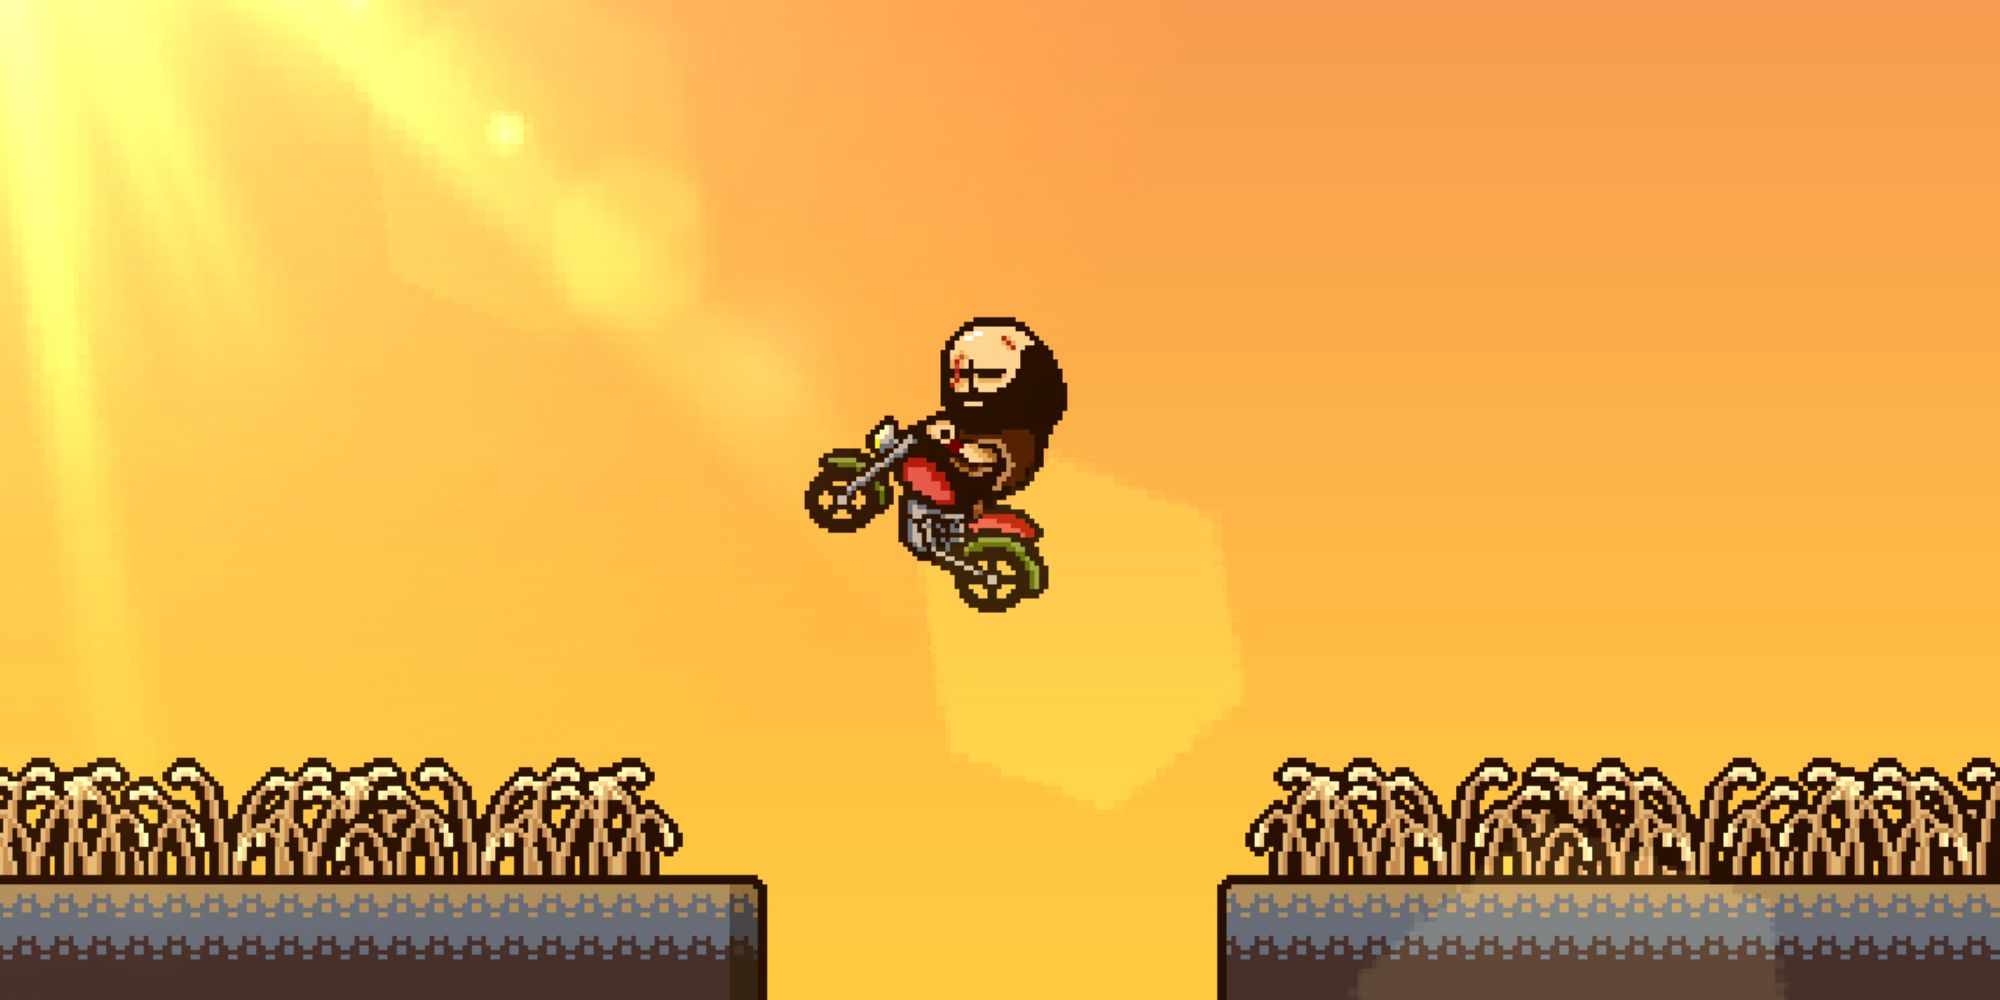 Lisa The Painful